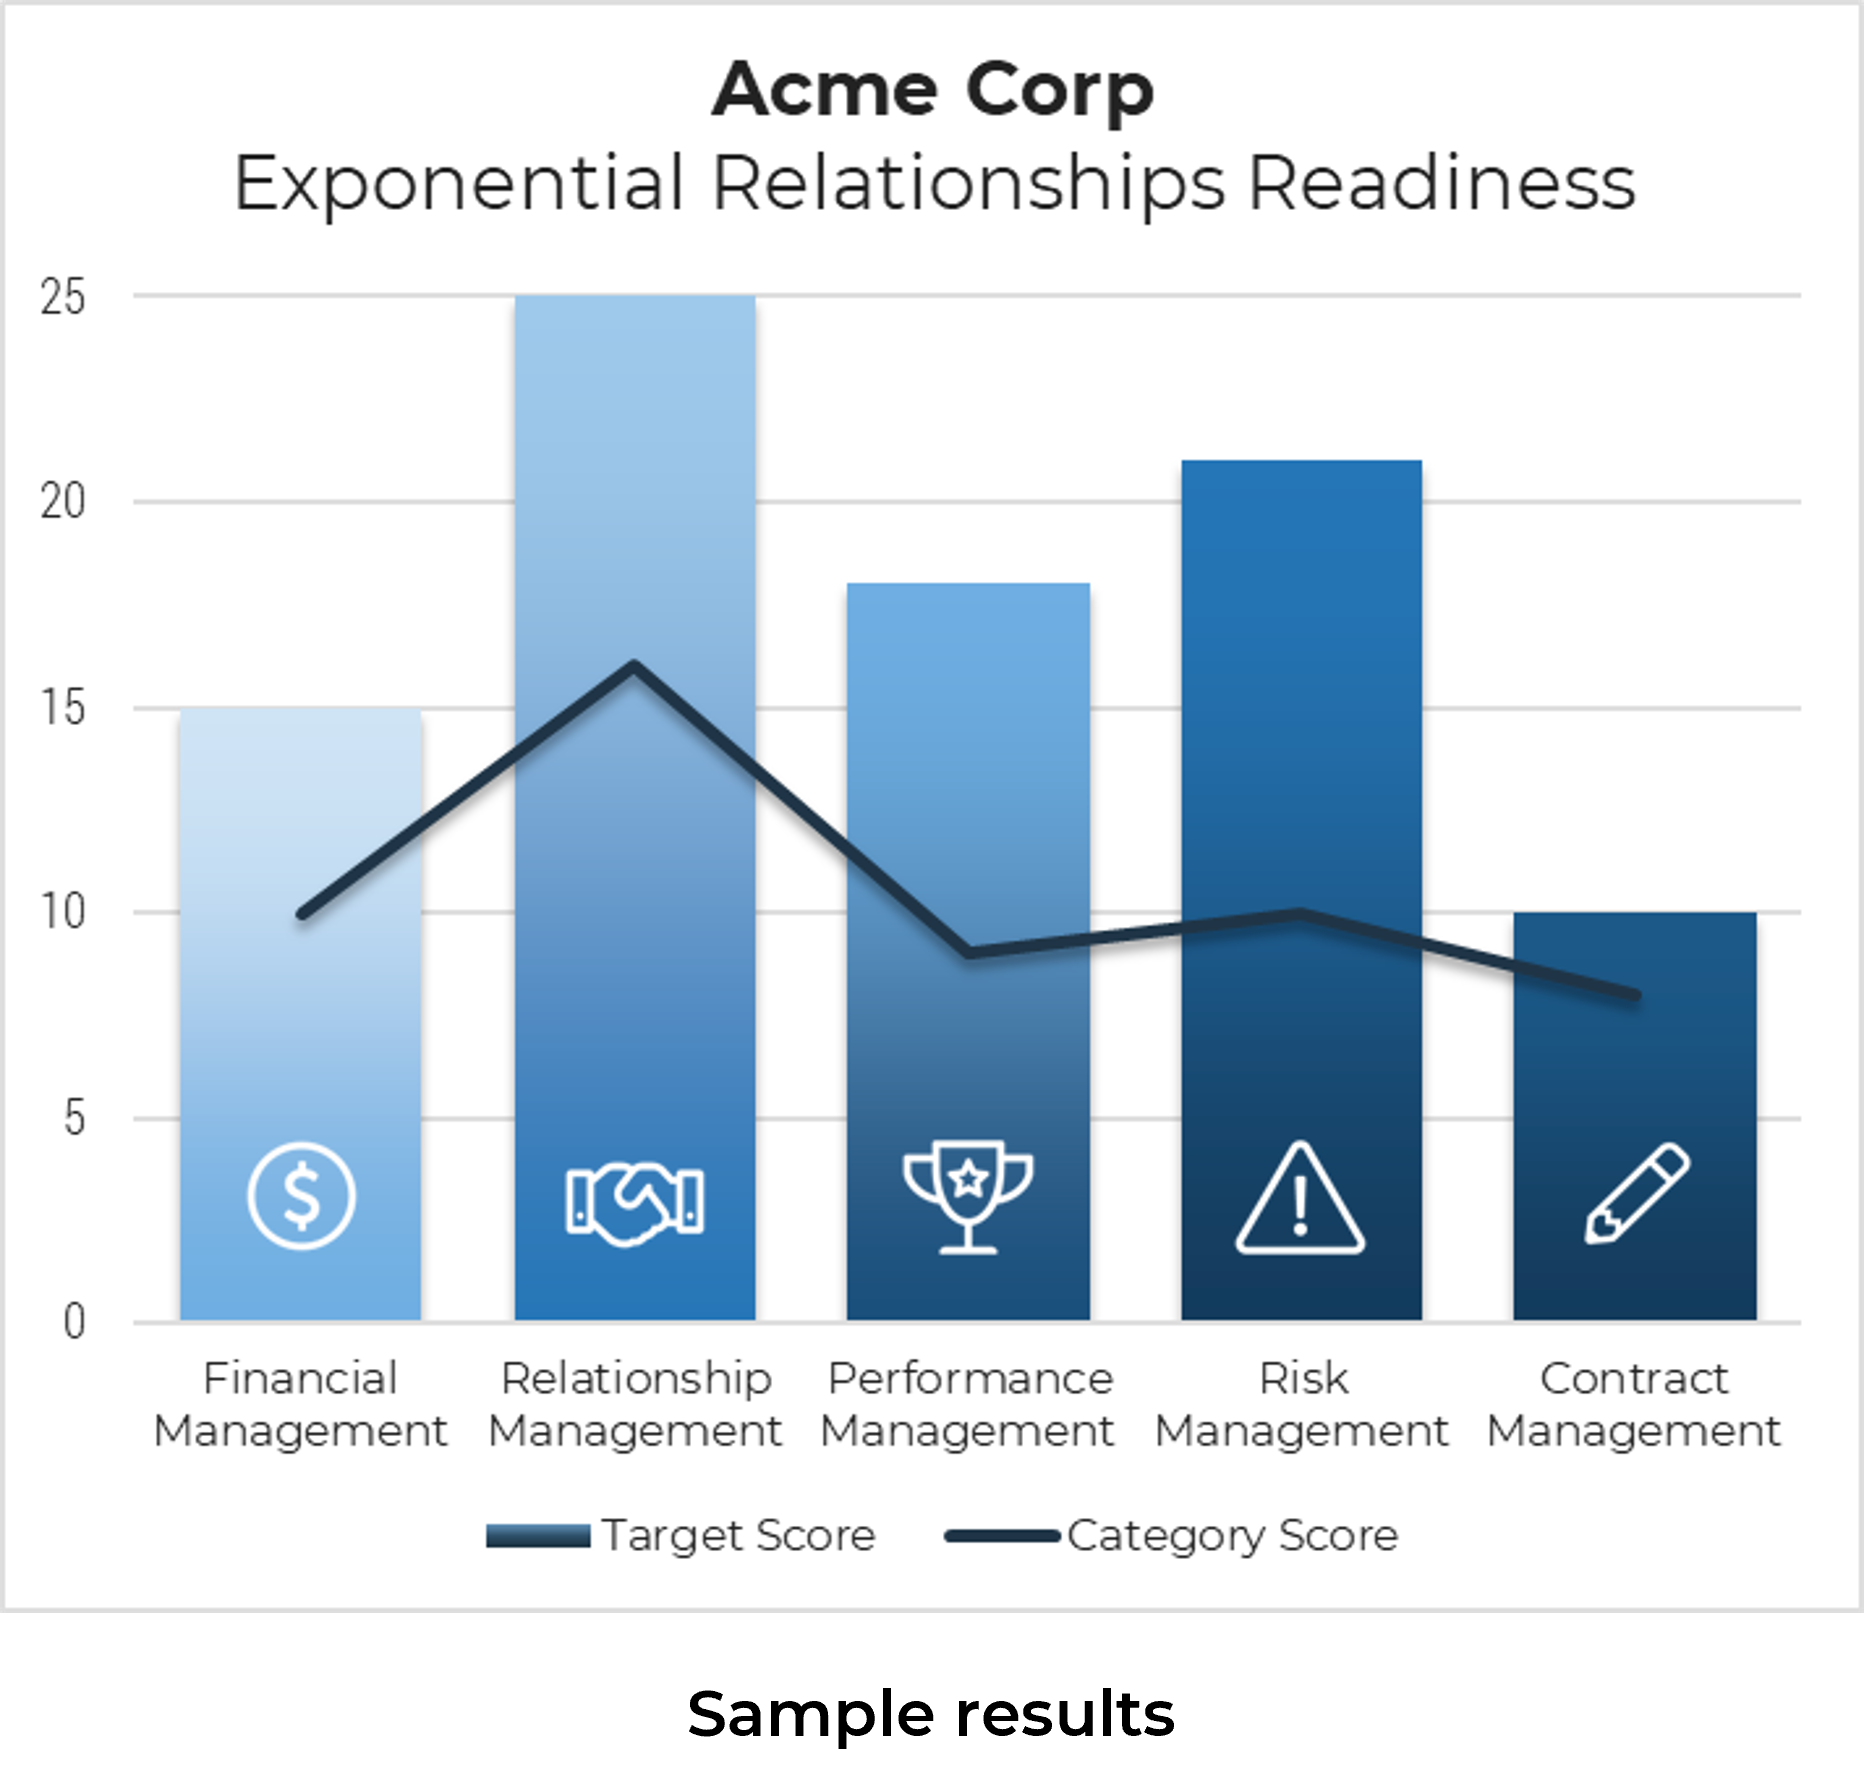 Acme Corp Exponential Relationships Readiness.